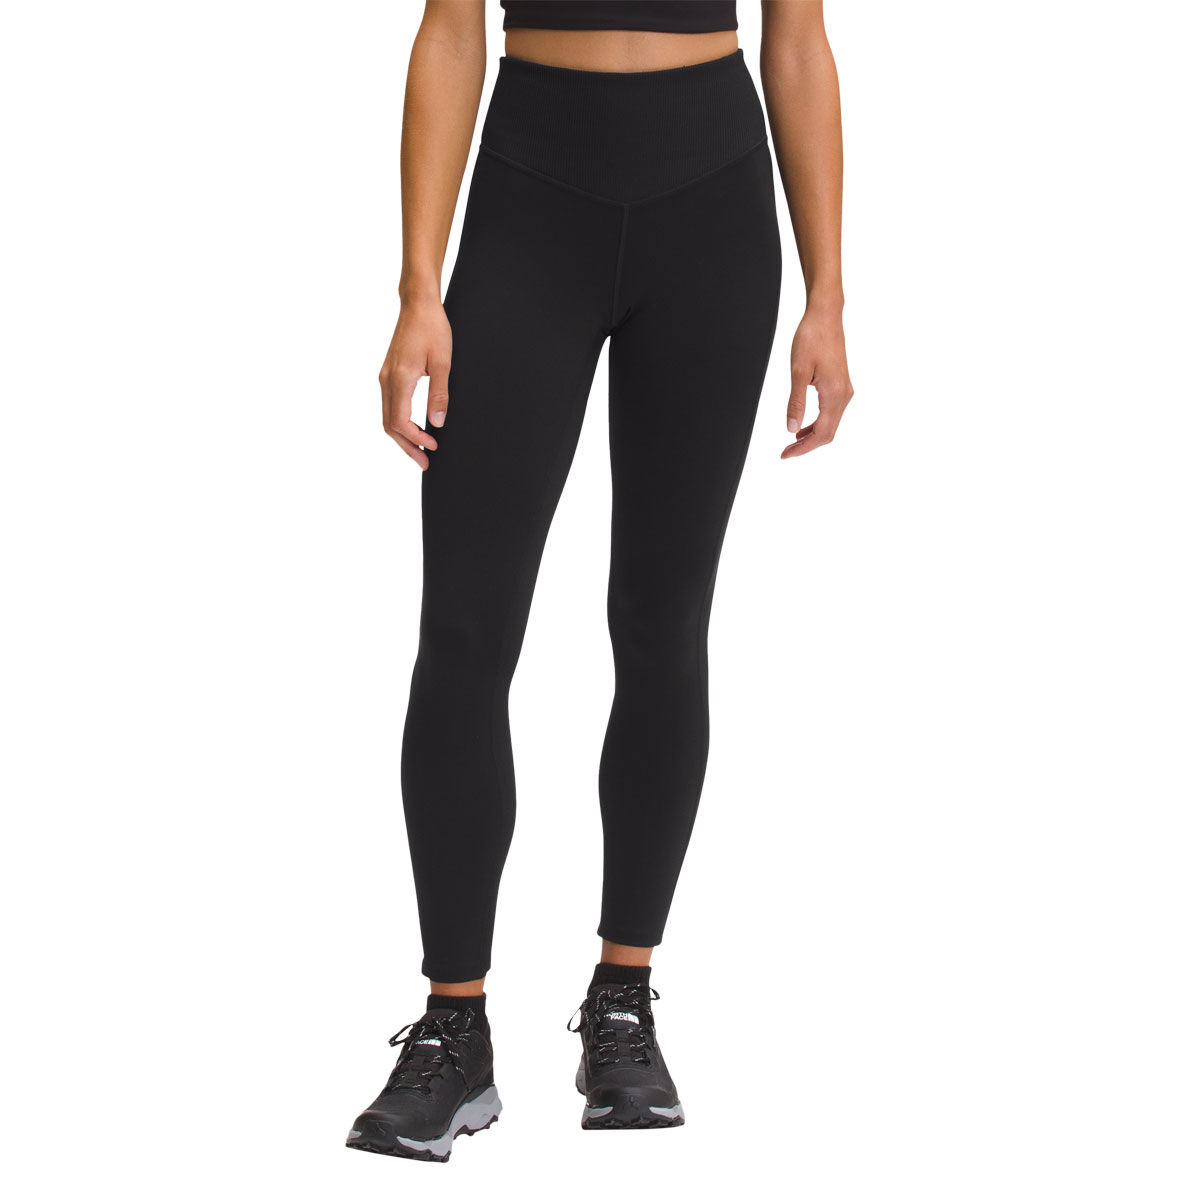 Reebok Women's Dynamic Highrise 7/8th Legging with Branded Drawcord